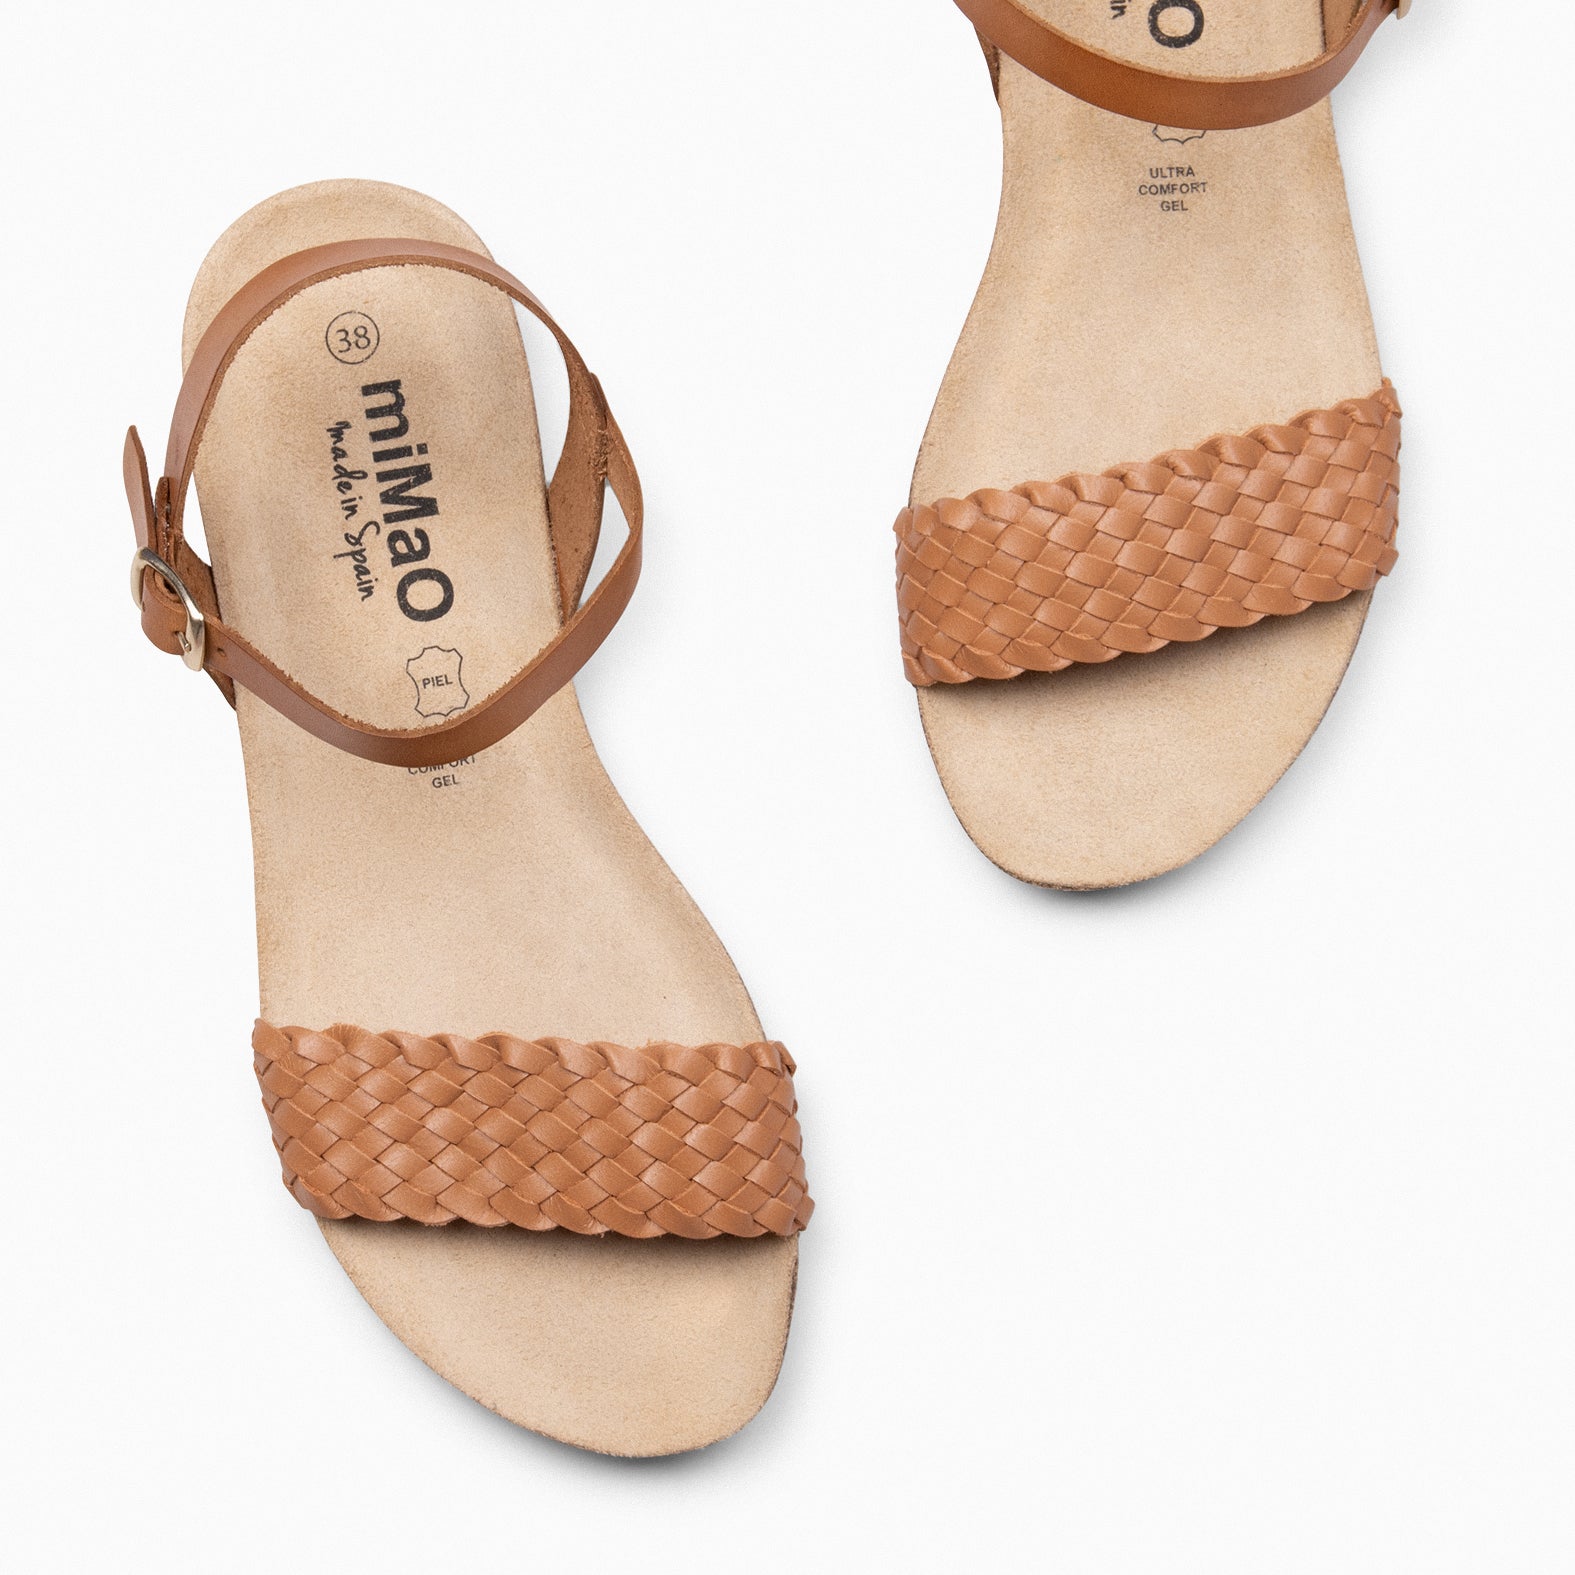 AIRE - LEATHER BIO Flat Sandals with braided strap